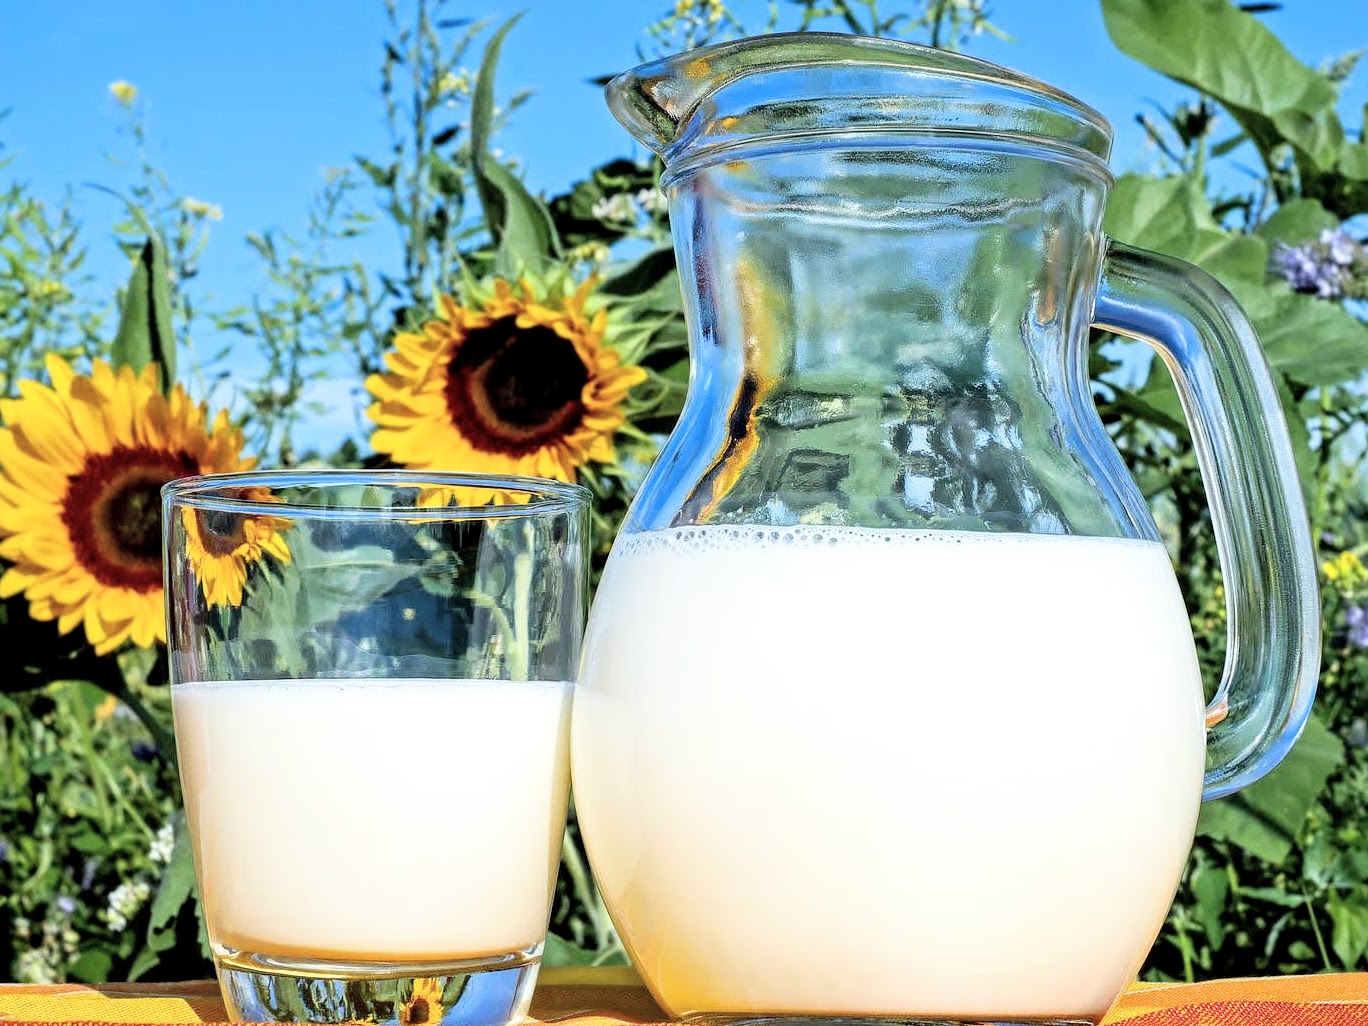 glass of milk and milk pitcher in front of sunflowers